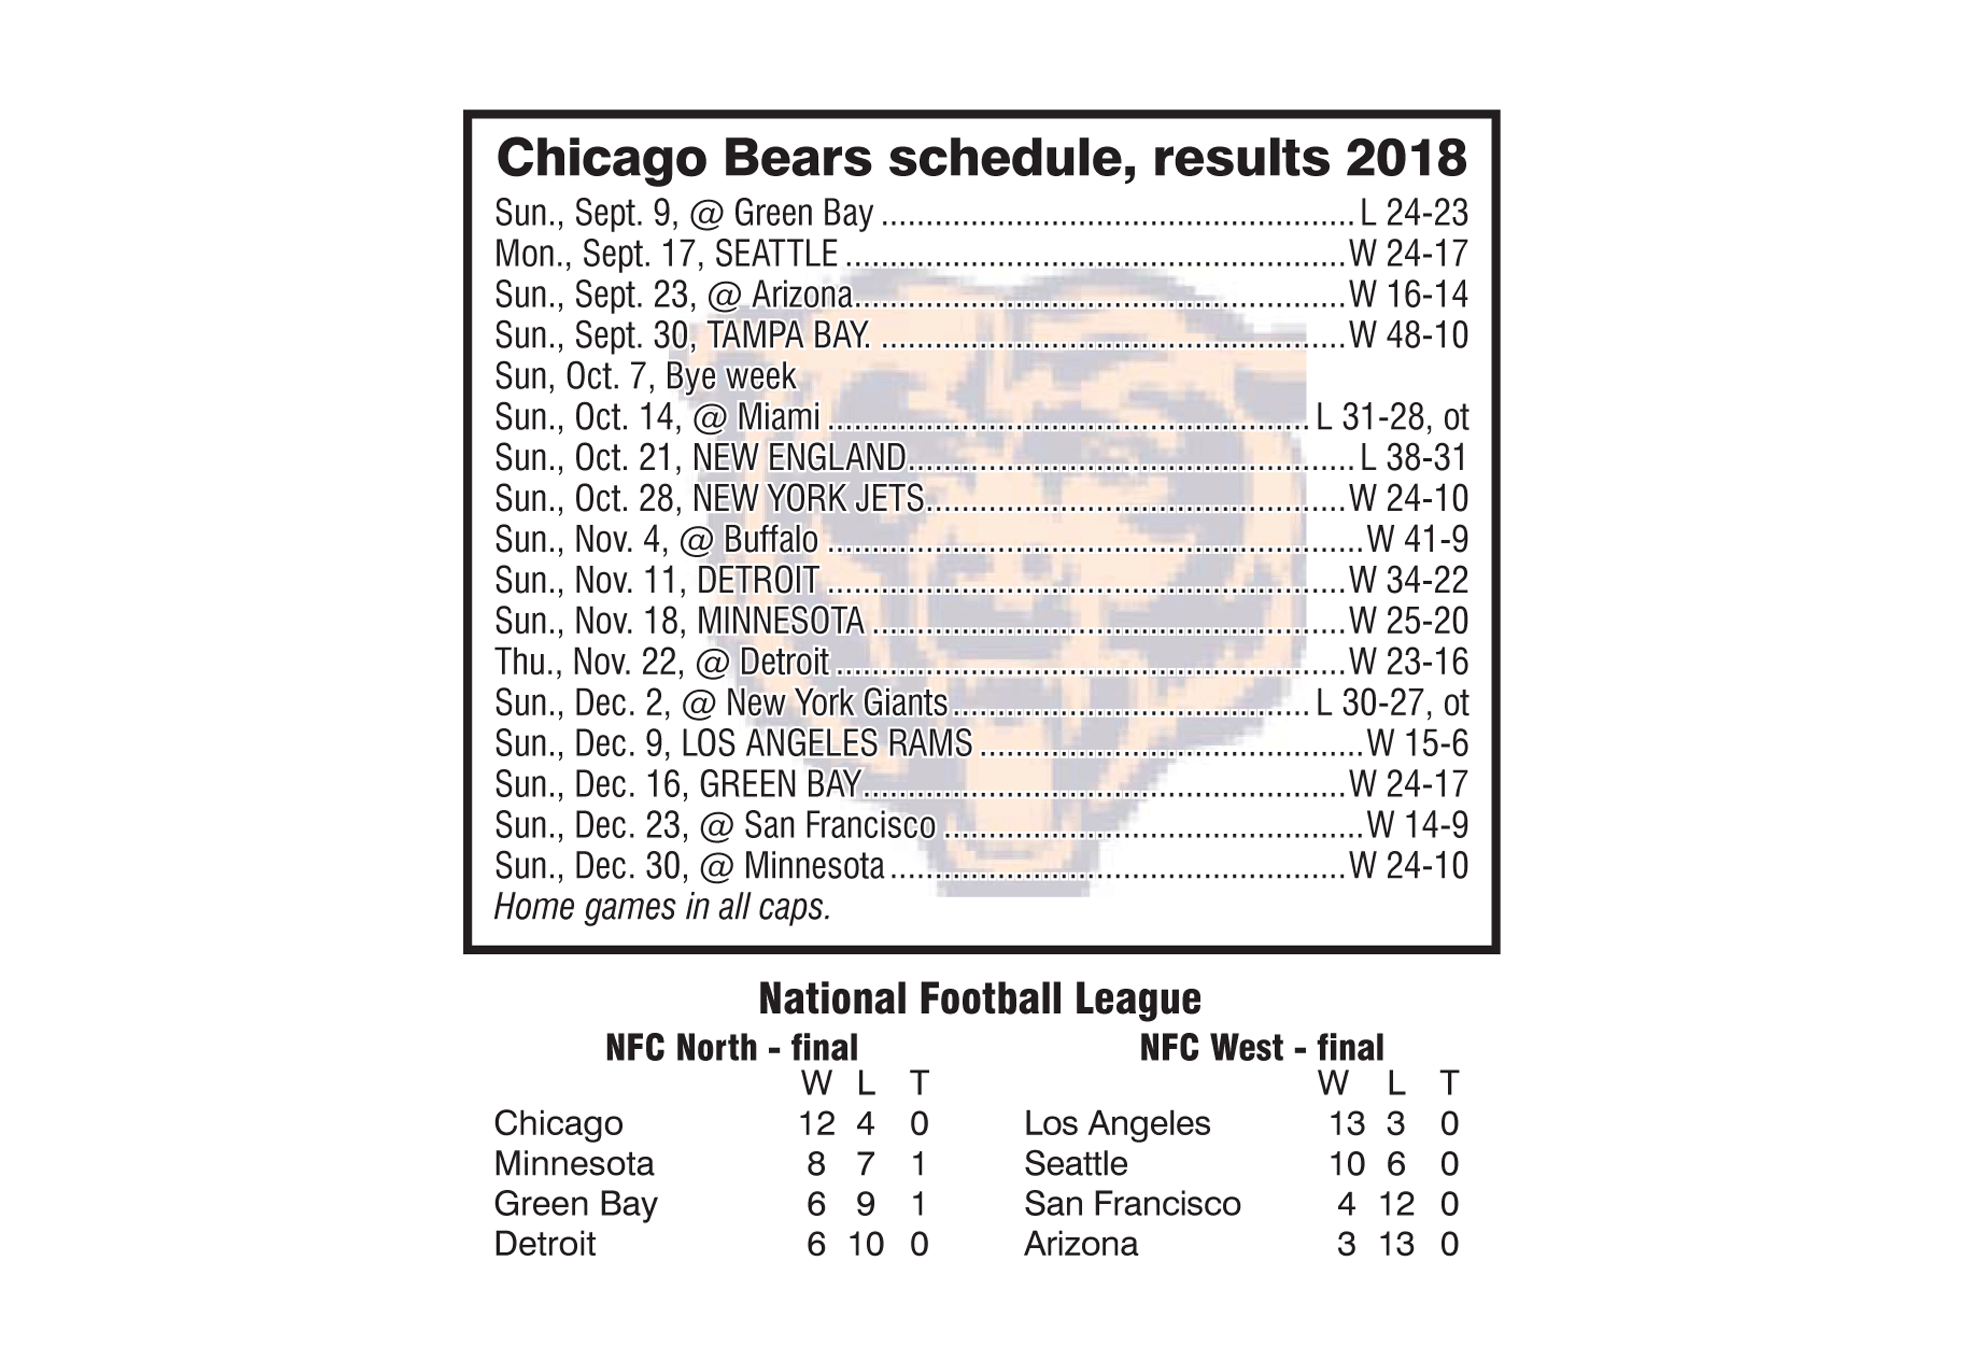 Chicago Bears 2018 schedule and results through December 30, 2018